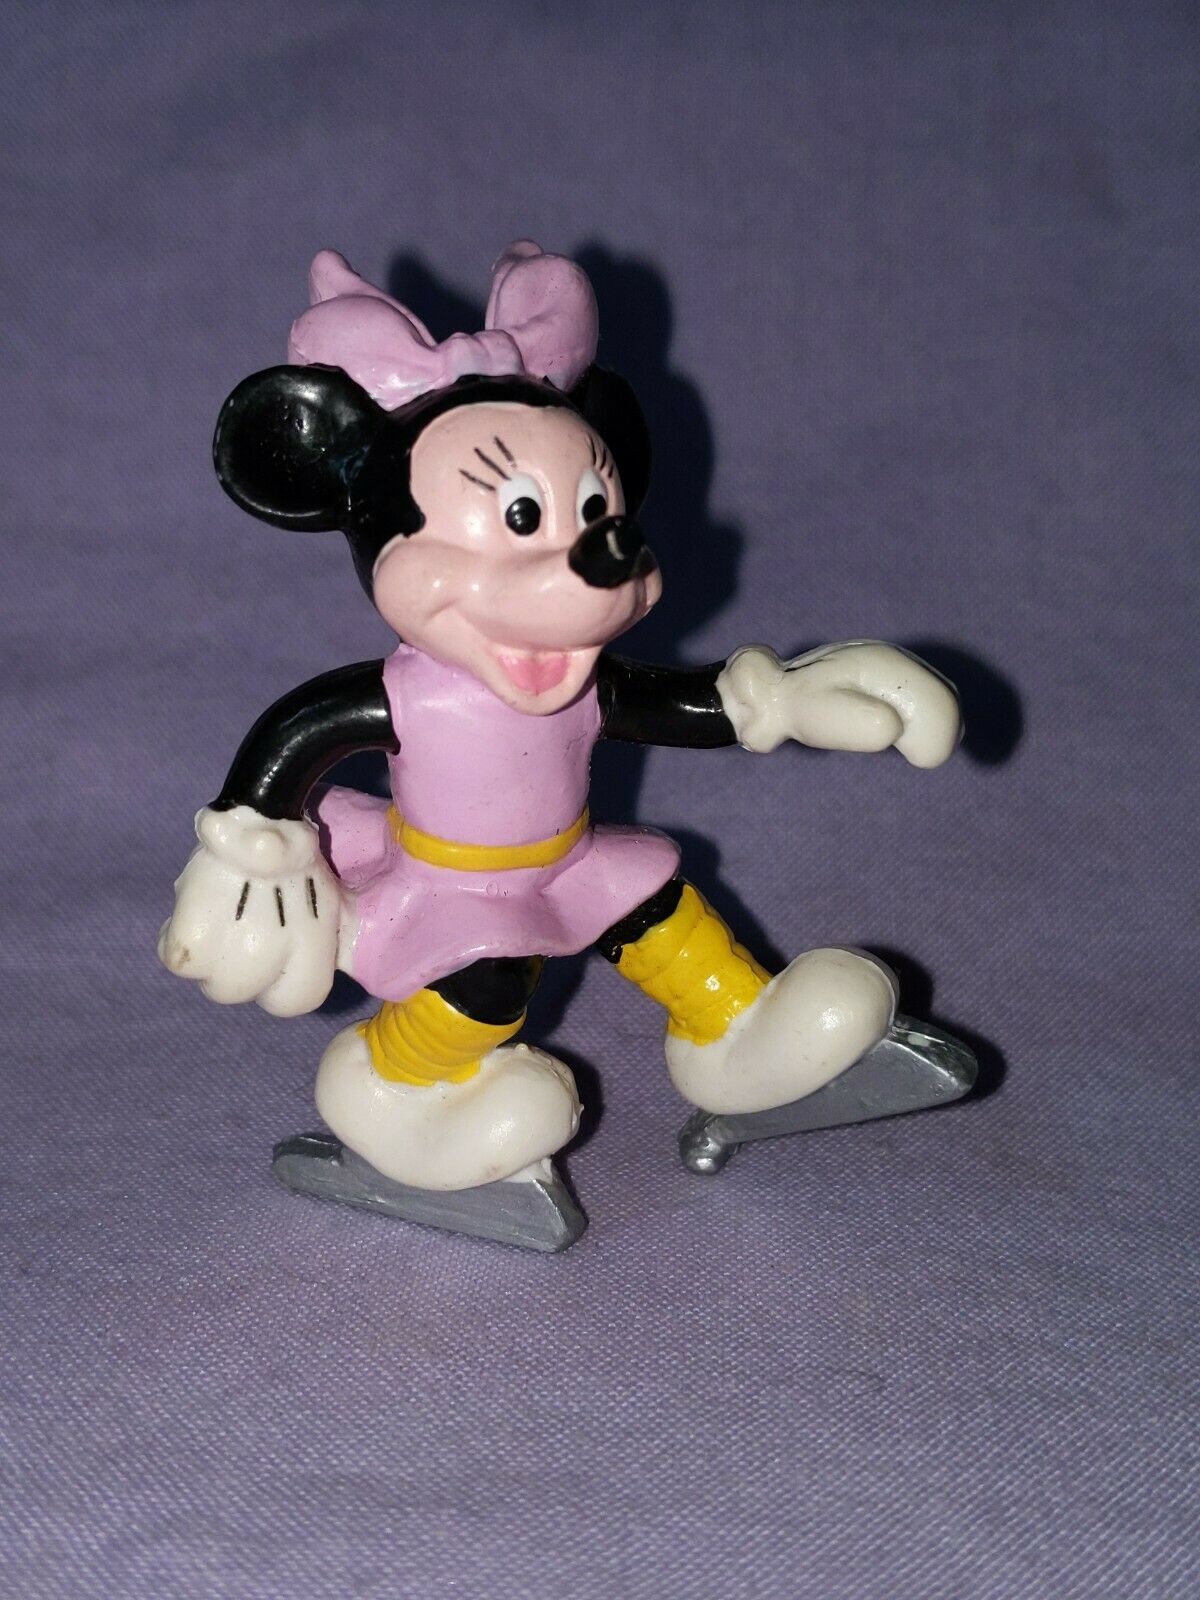 Disney's Minnie Mouse Ice Skating Cake Toppers PVC Figurine Applause China 2¼